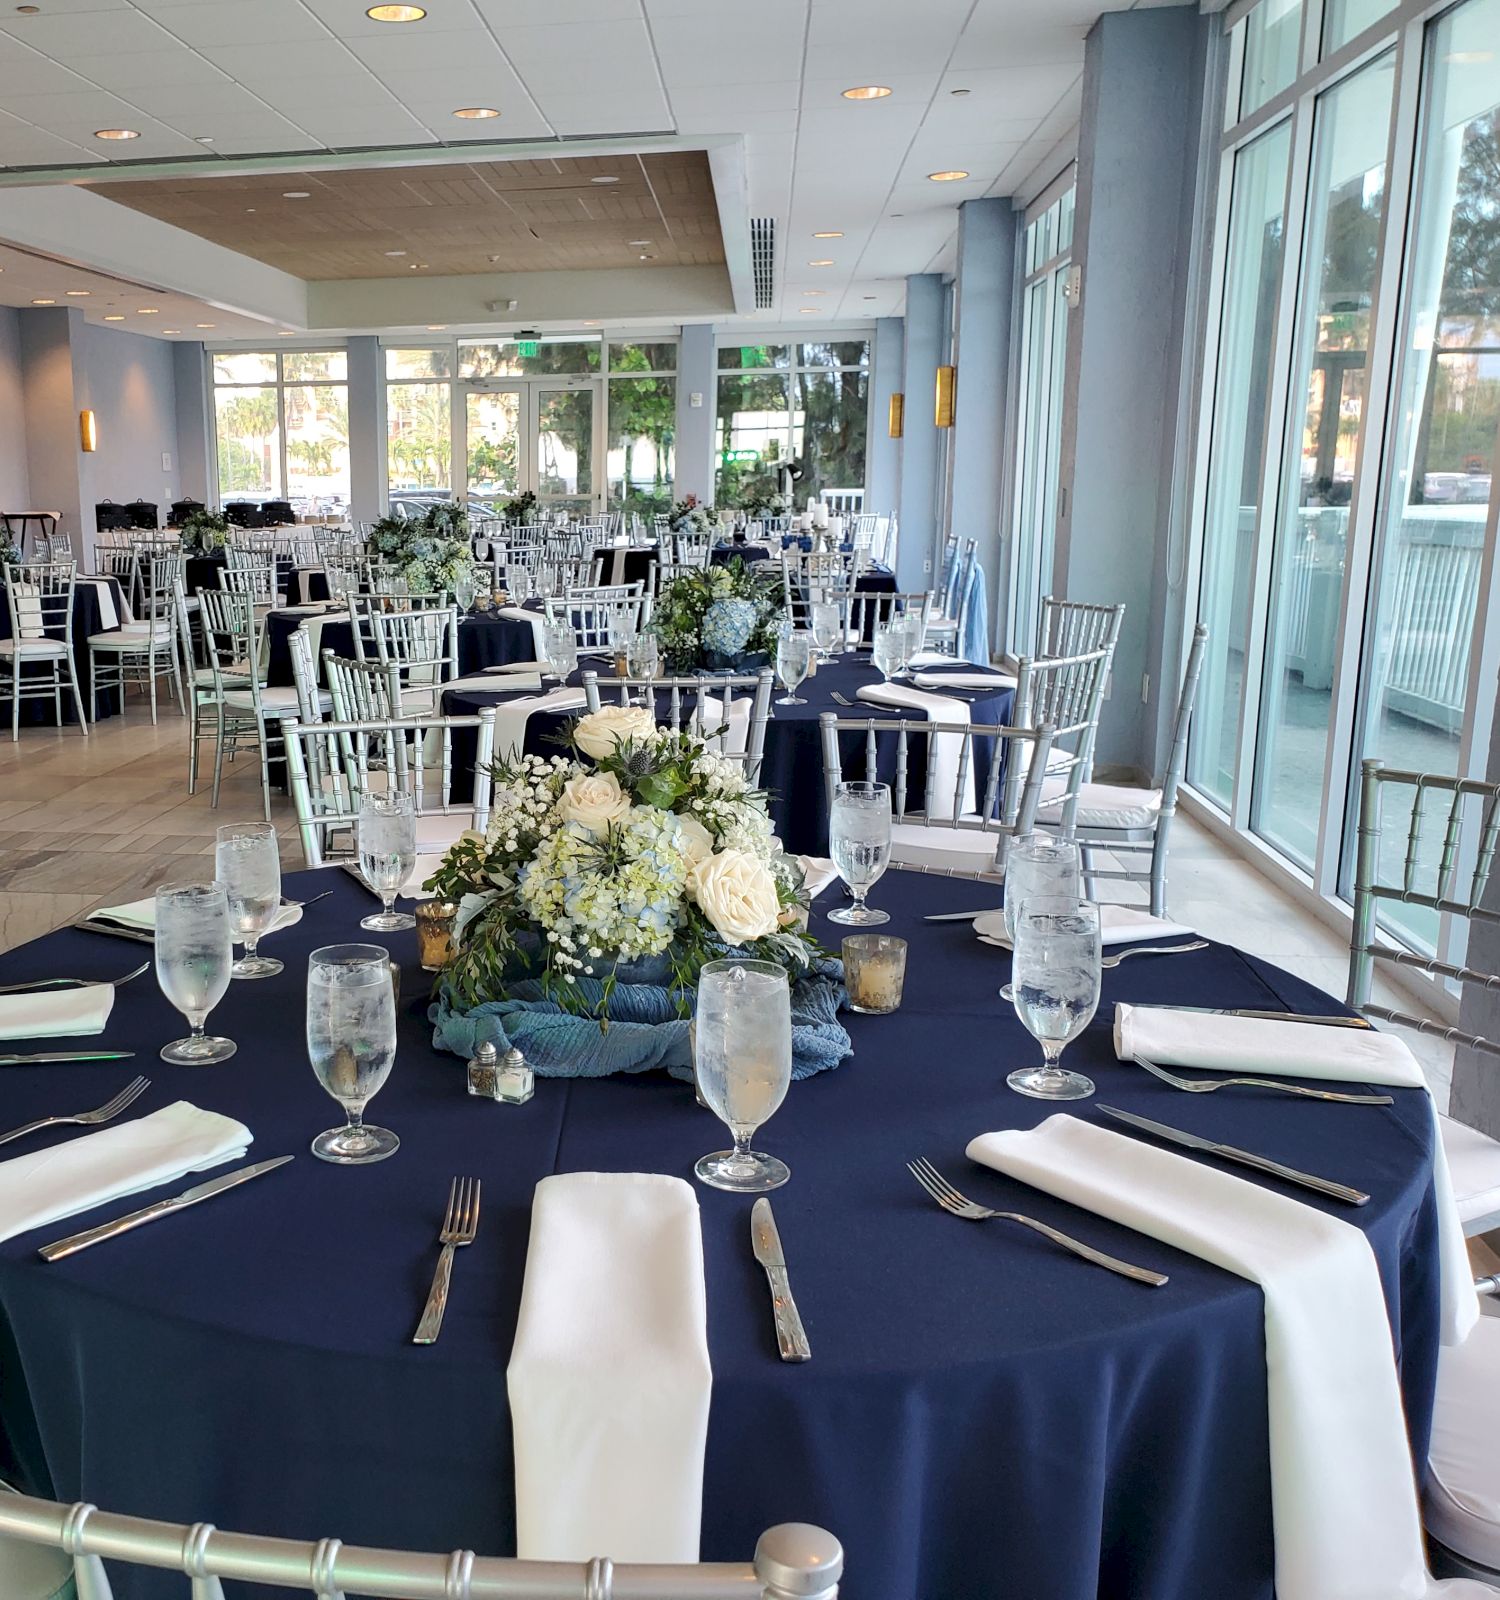 A banquet hall is set up for an event, with round tables covered in navy and white linens, floral centerpieces, and silver chairs around them.